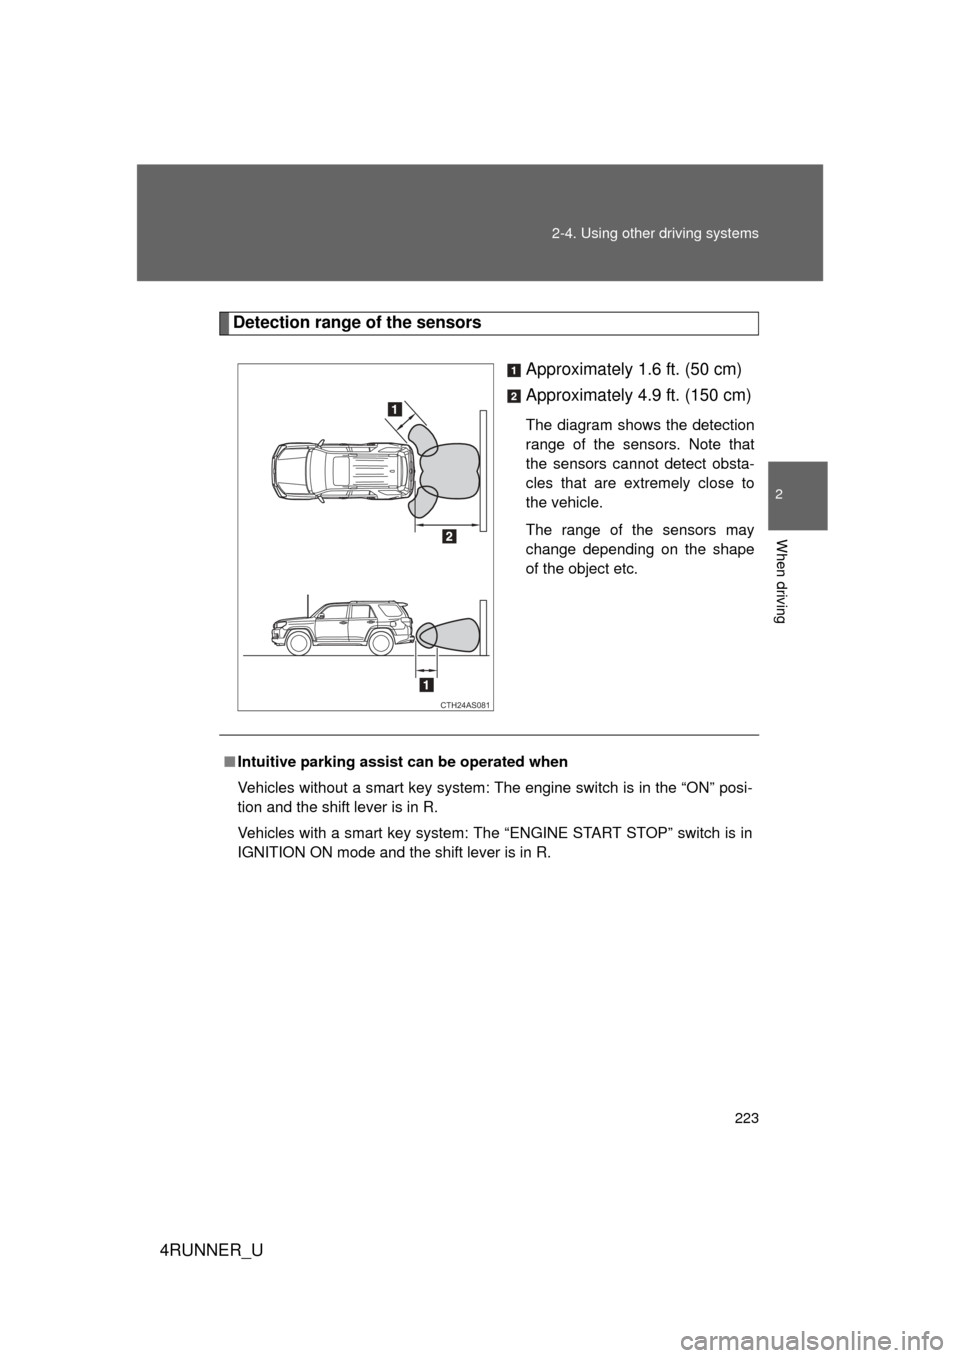 TOYOTA 4RUNNER 2012 N280 / 5.G Owners Manual 223
2-4. Using other 
driving systems
2
When driving
4RUNNER_U
Detection range of the sensors
Approximately 1.6 ft. (50 cm)
Approximately 4.9 ft. (150 cm)
The diagram shows the detection
range of the 